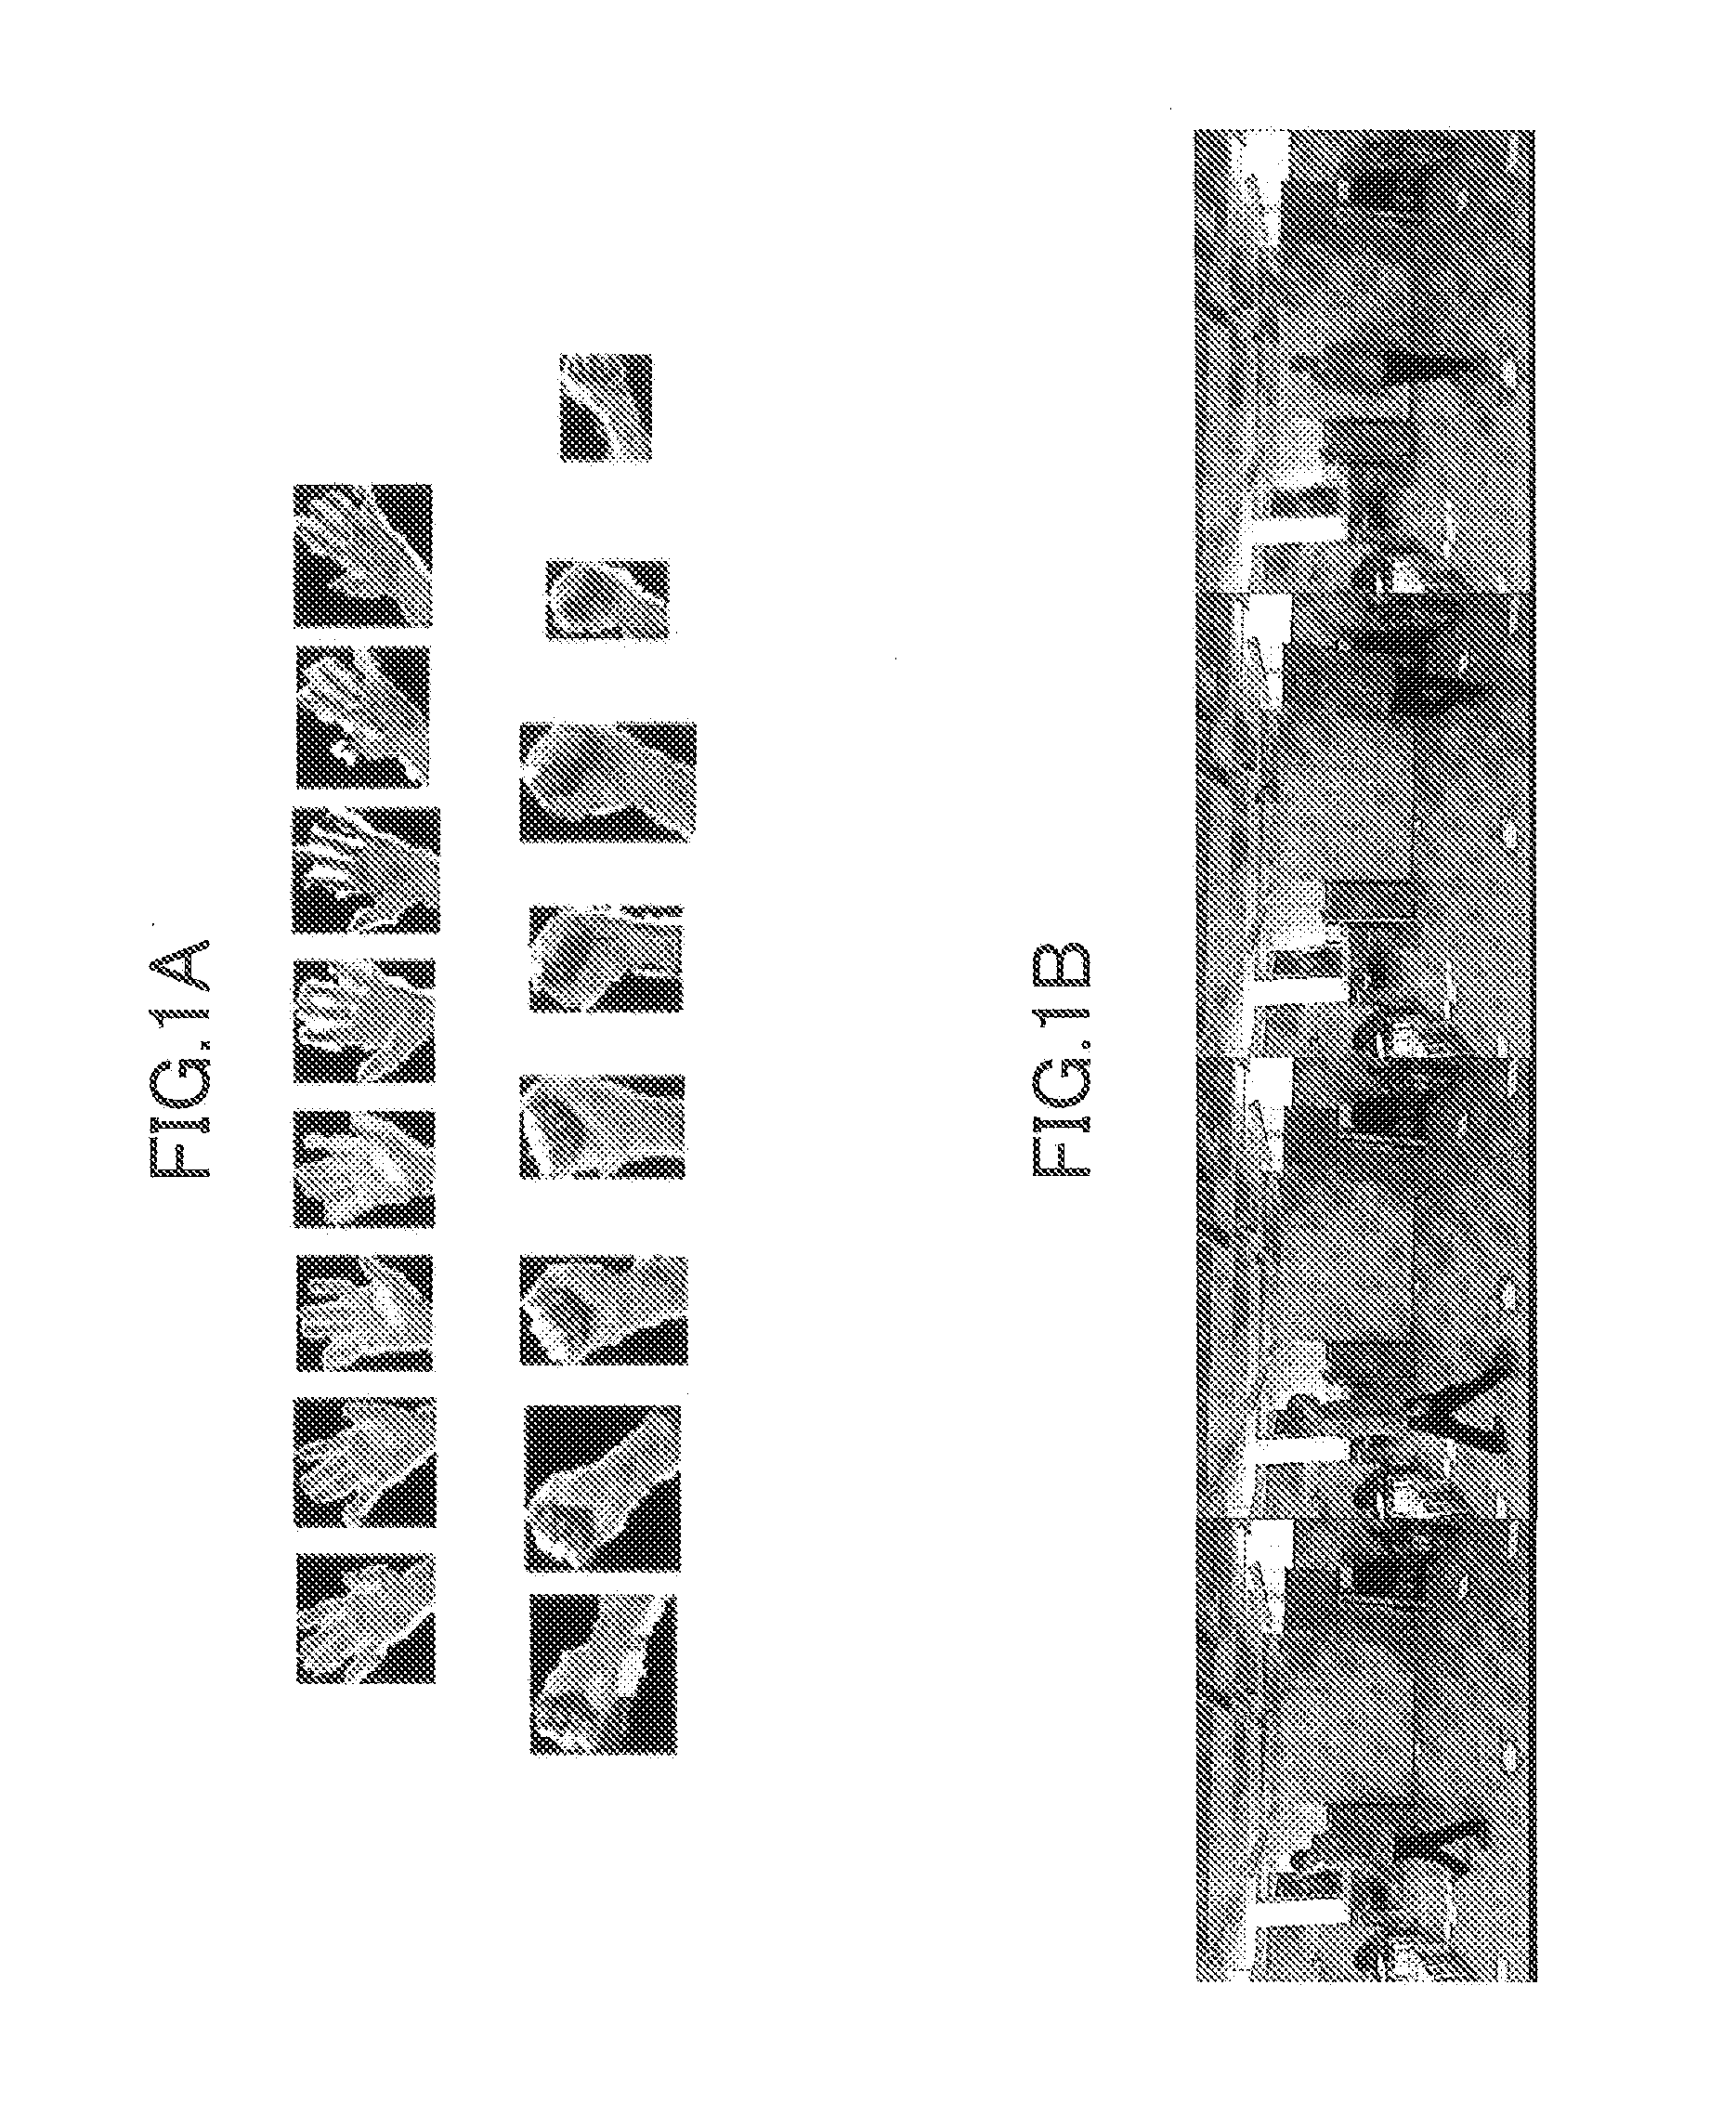 Method and apparatus for expressing motion object